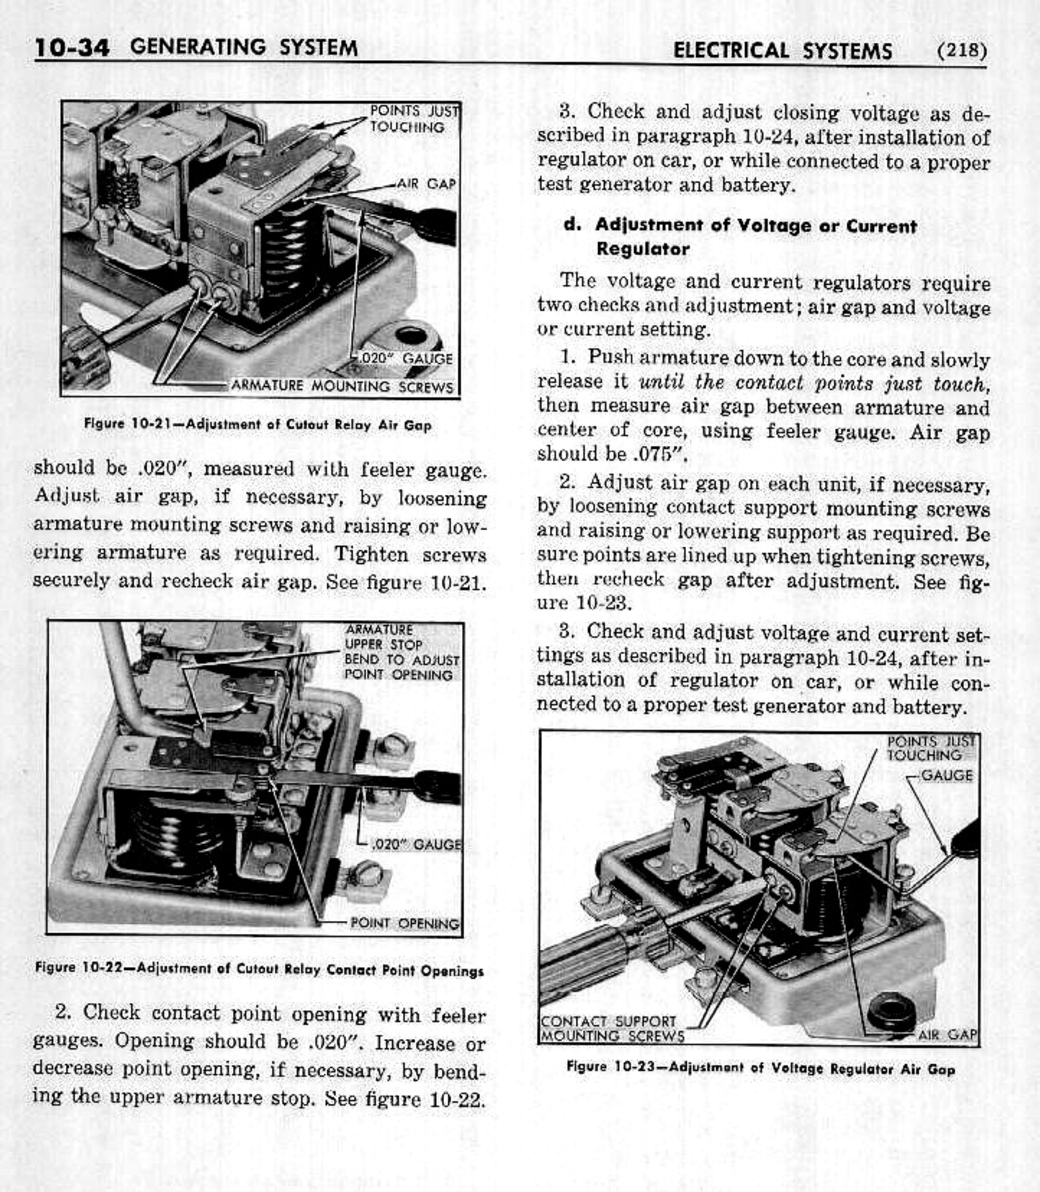 n_11 1953 Buick Shop Manual - Electrical Systems-034-034.jpg